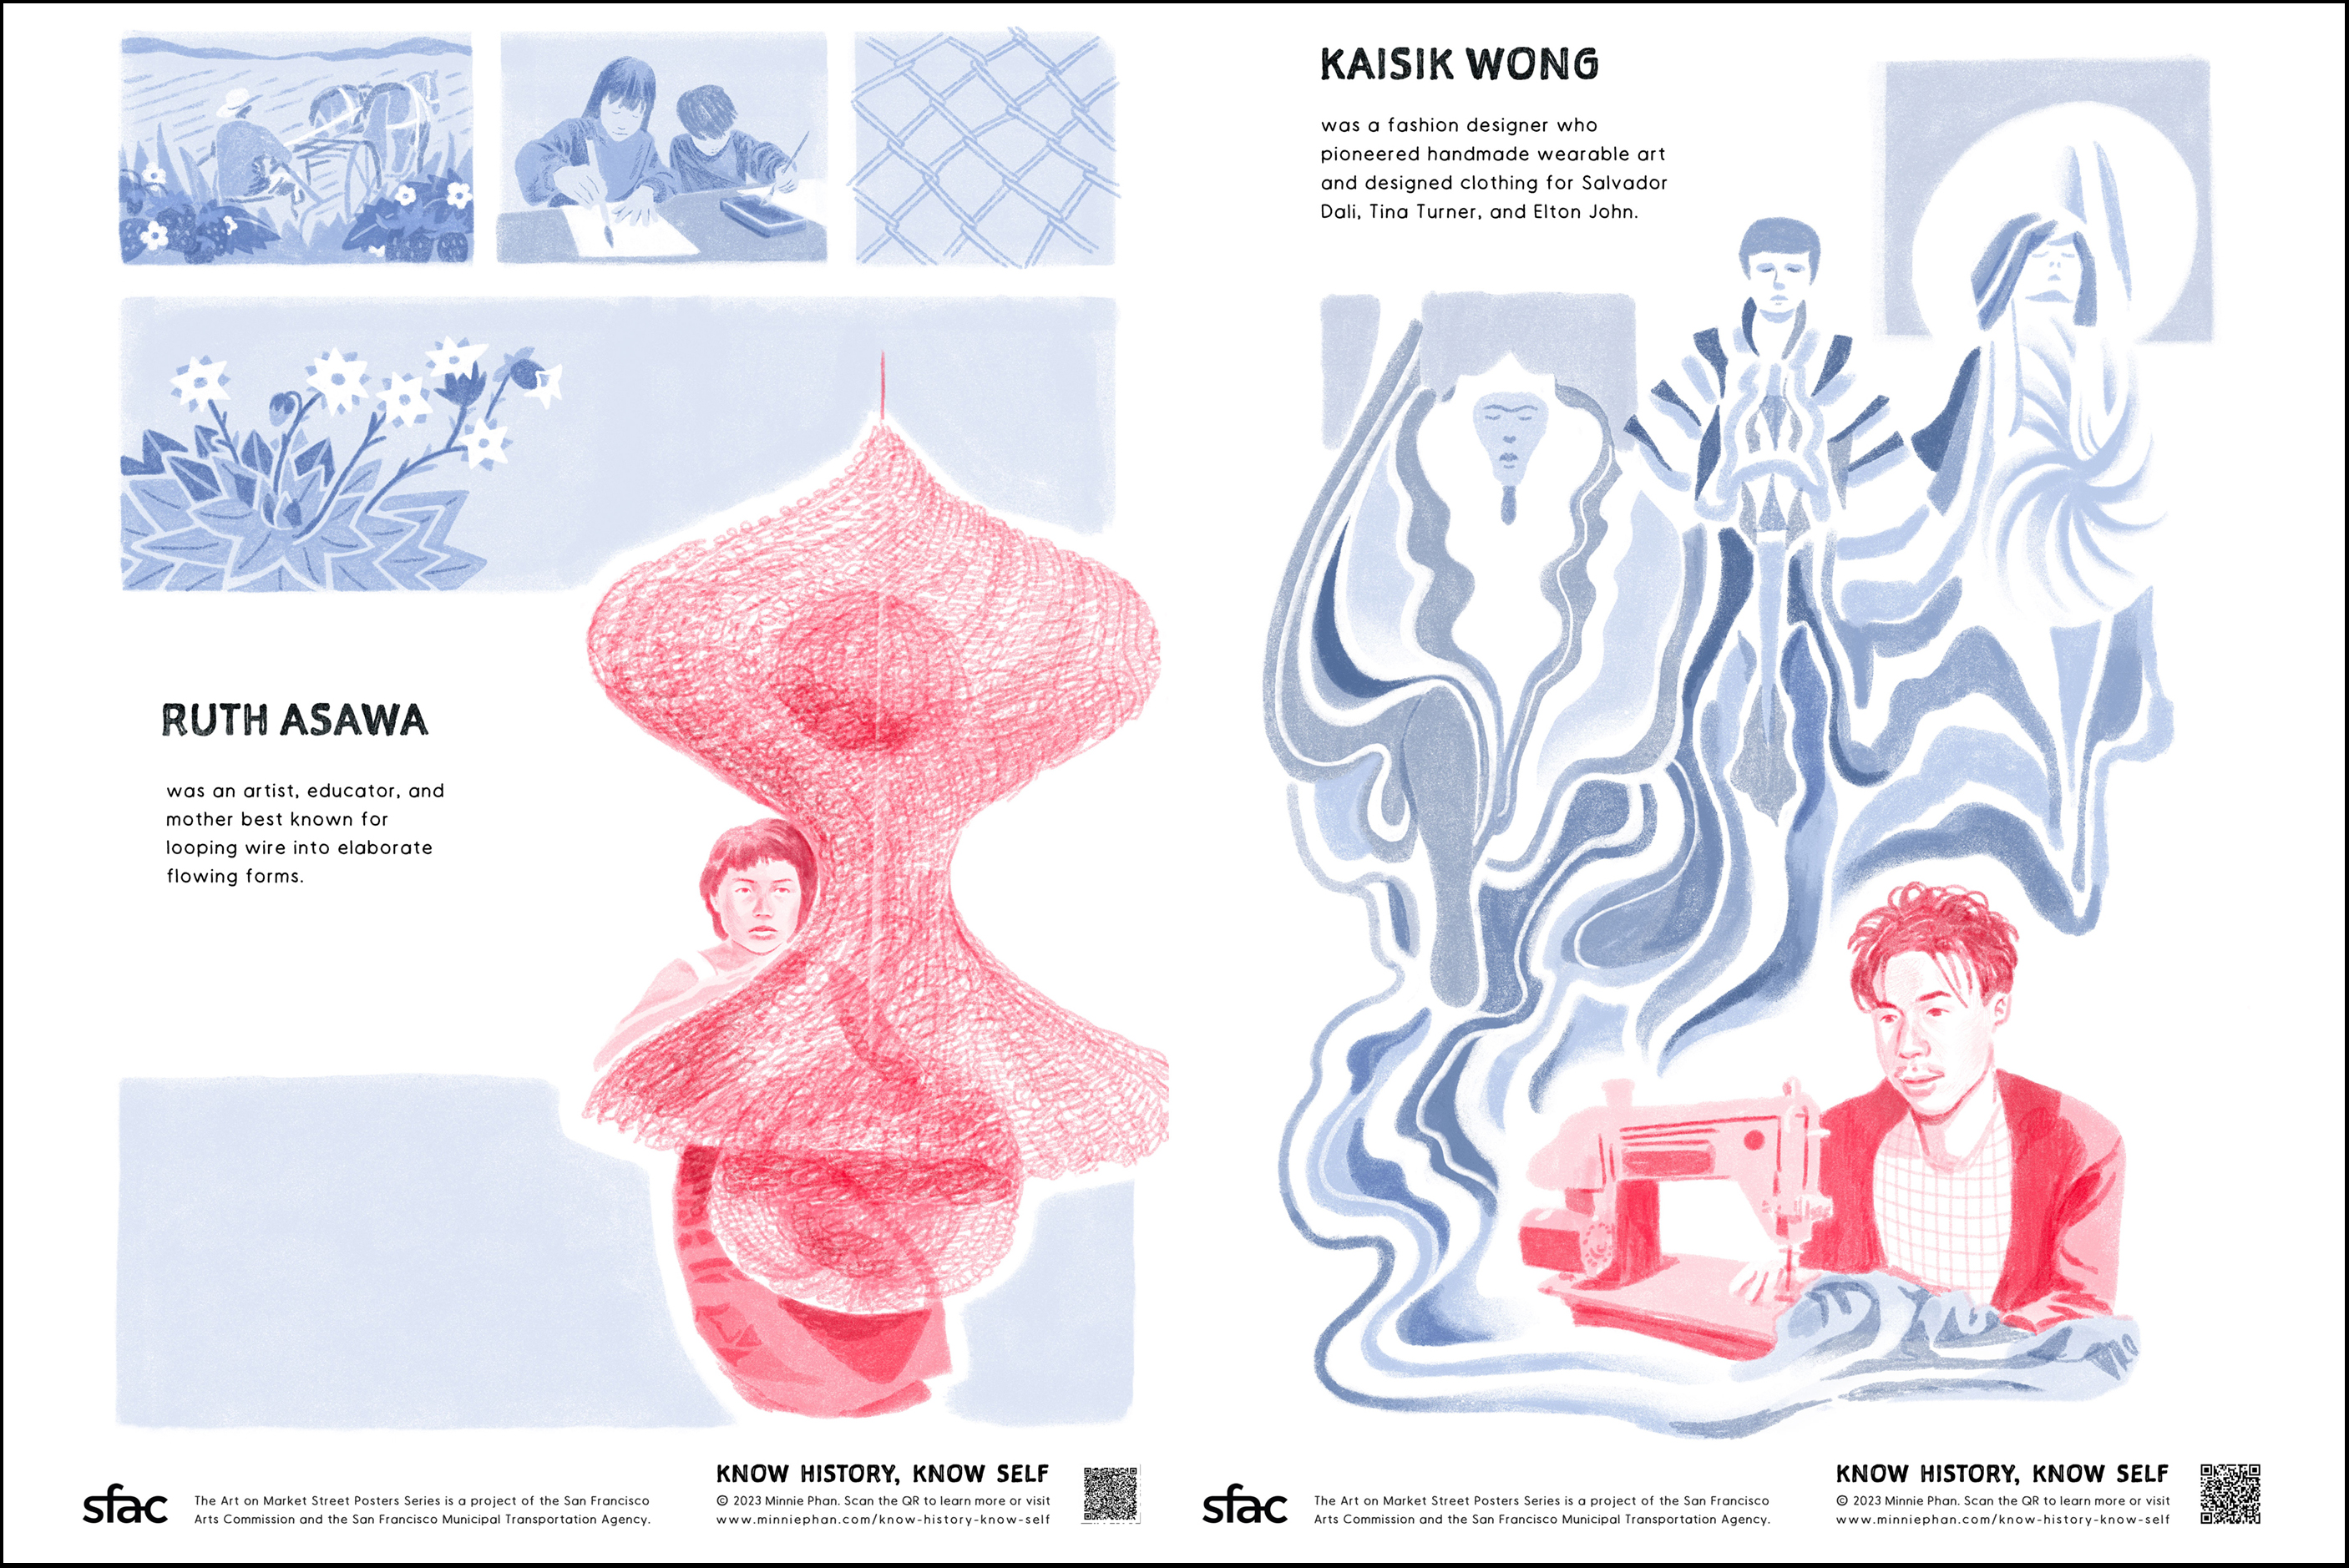 A composite image of two posters that are featured in the “Art on Market Street” series that include comics of visual artist Ruth Asawa standing behind one of her wires structures, left, and fashion designer Kaisik Wong sitting behind his sewing machine, right.